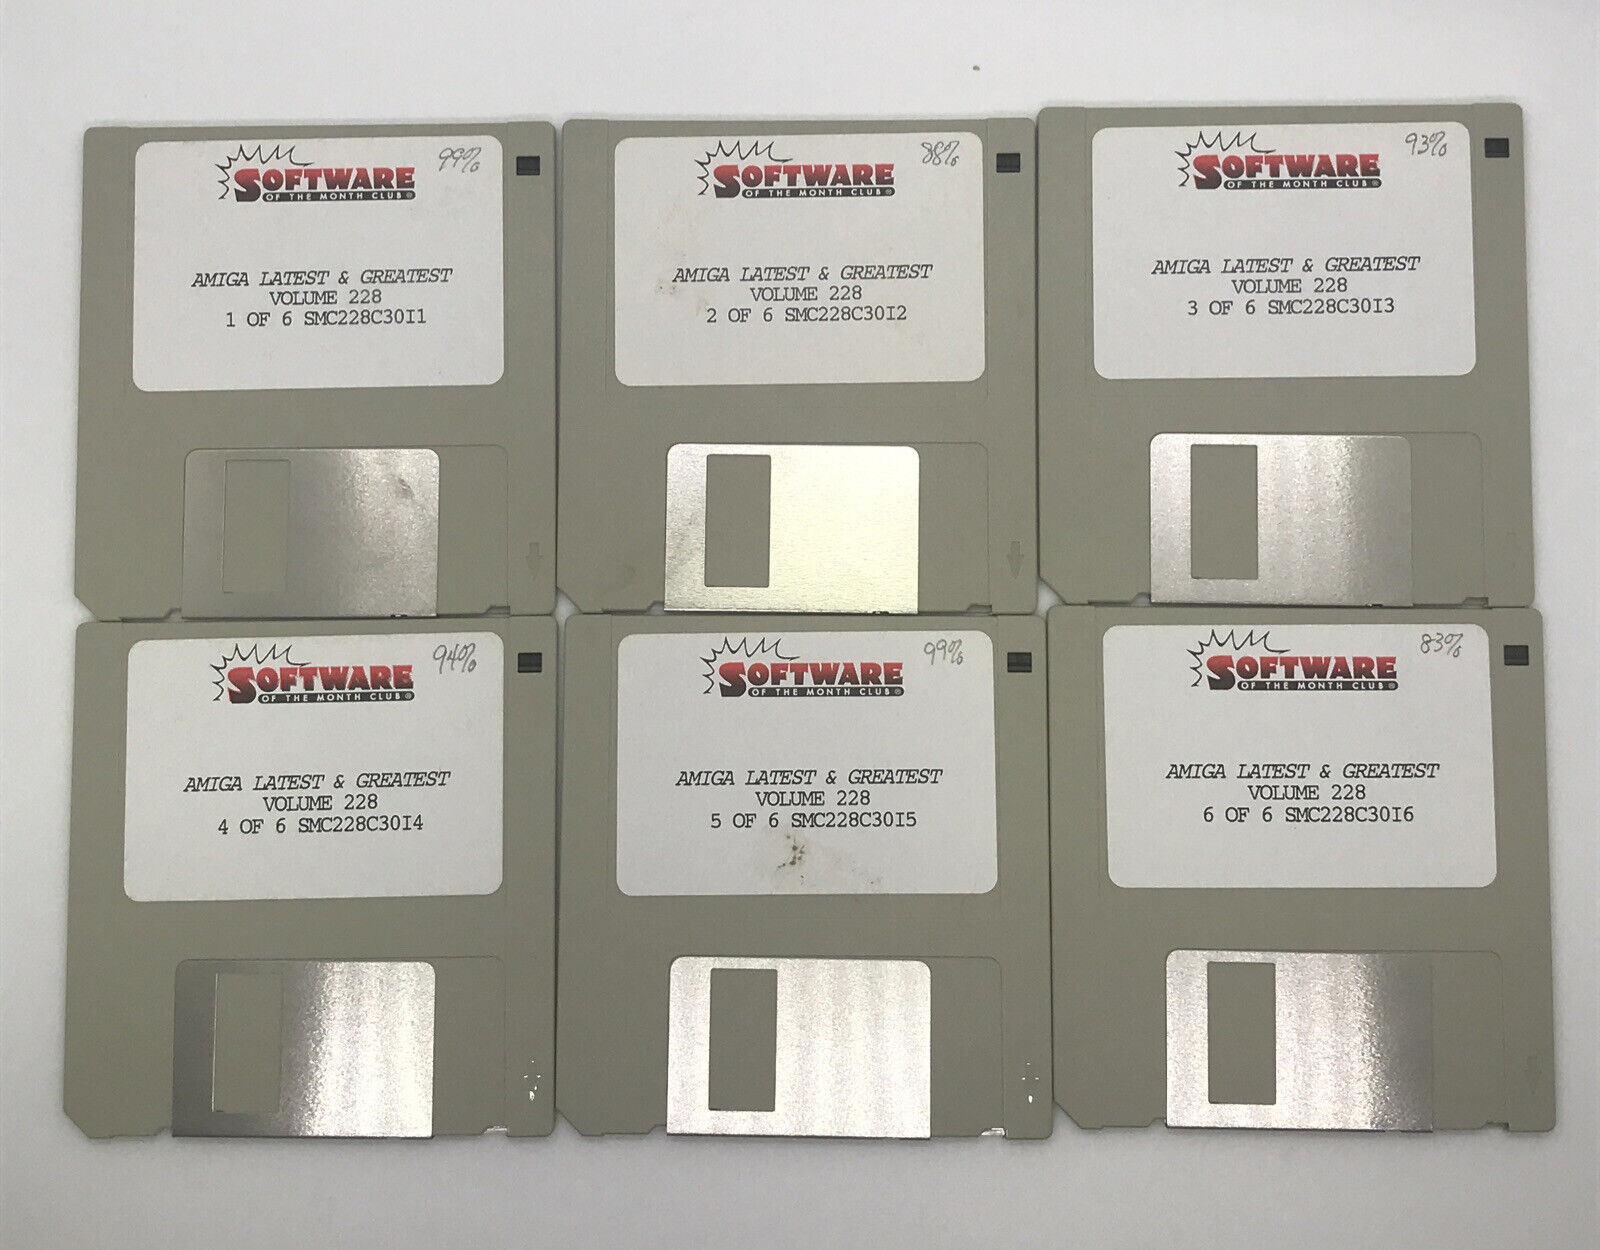 Software Of The Month Club Amiga Latest & Greatest Vol. 228 On 6 Floppy Discs